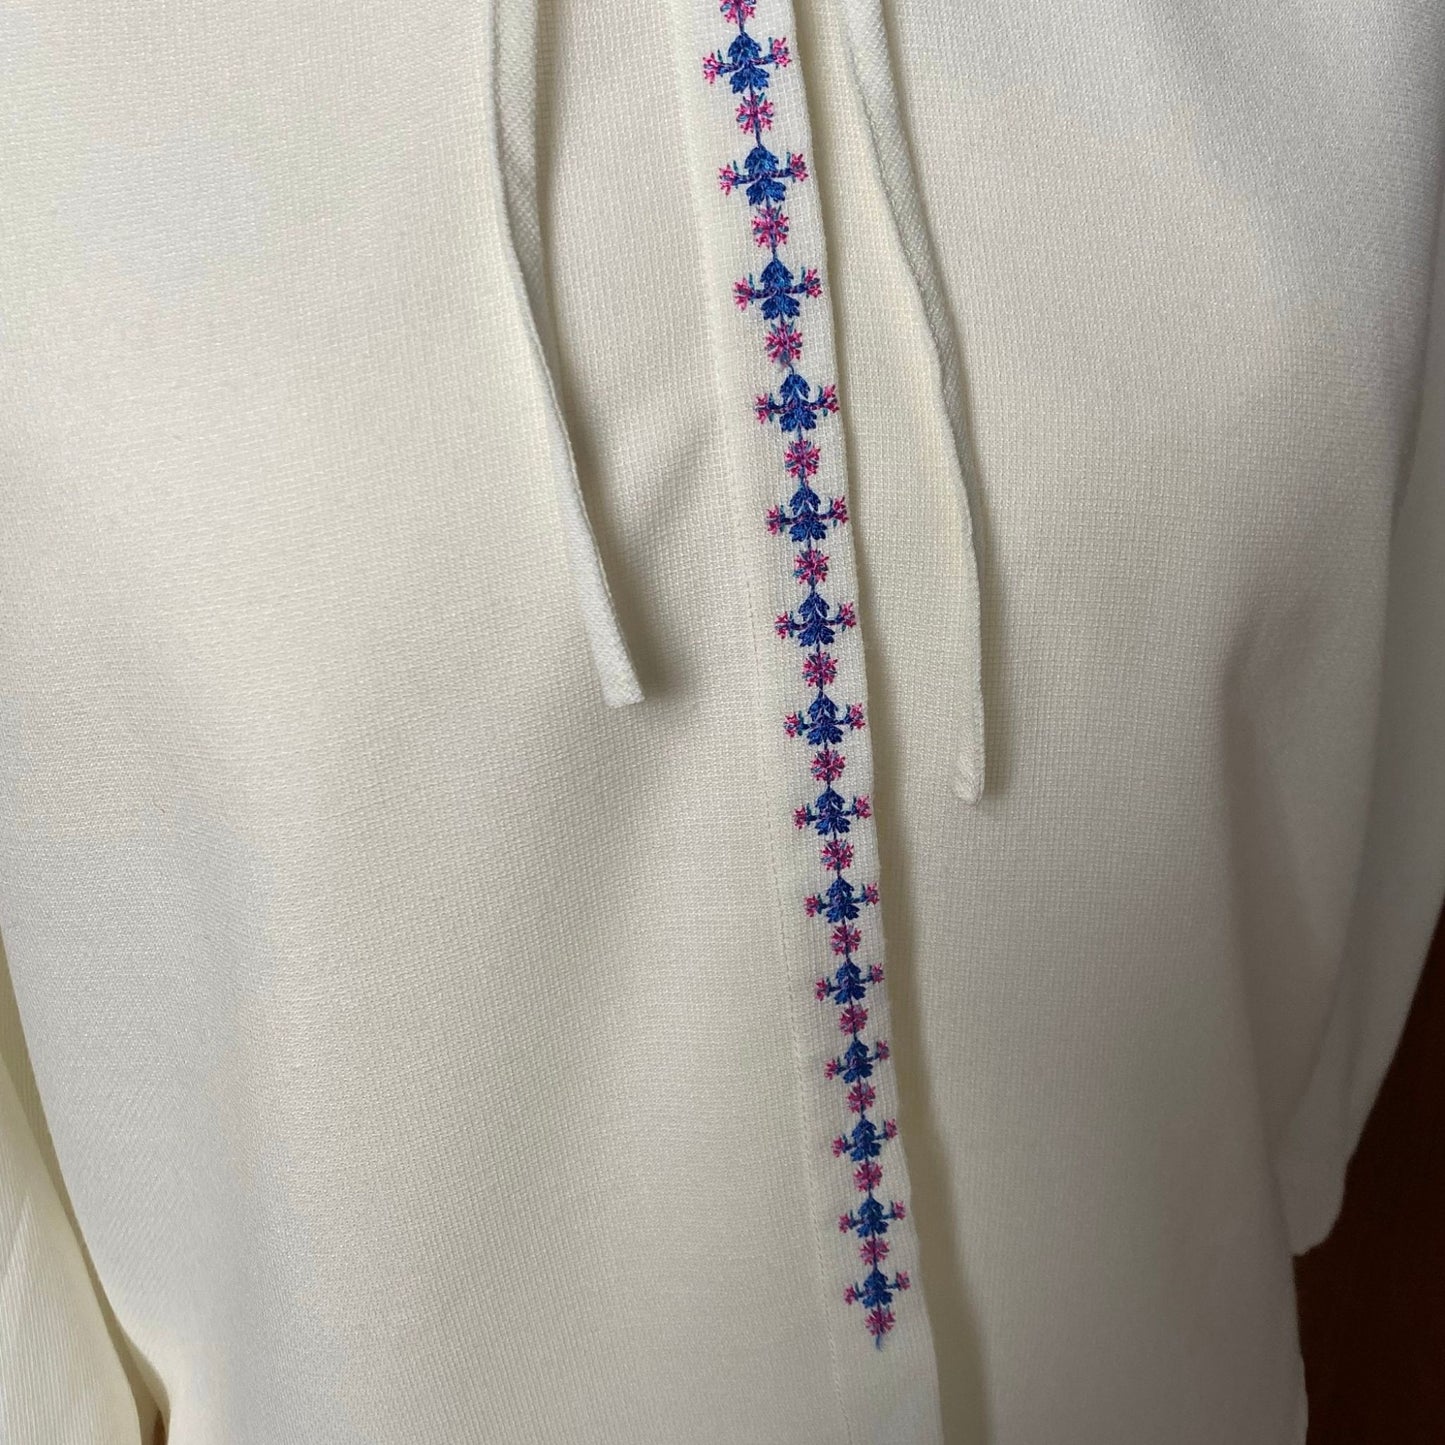 80s cream blouse with pink and blue floral embroidery and Peter Pan collar. Approx U.K. size 12-14